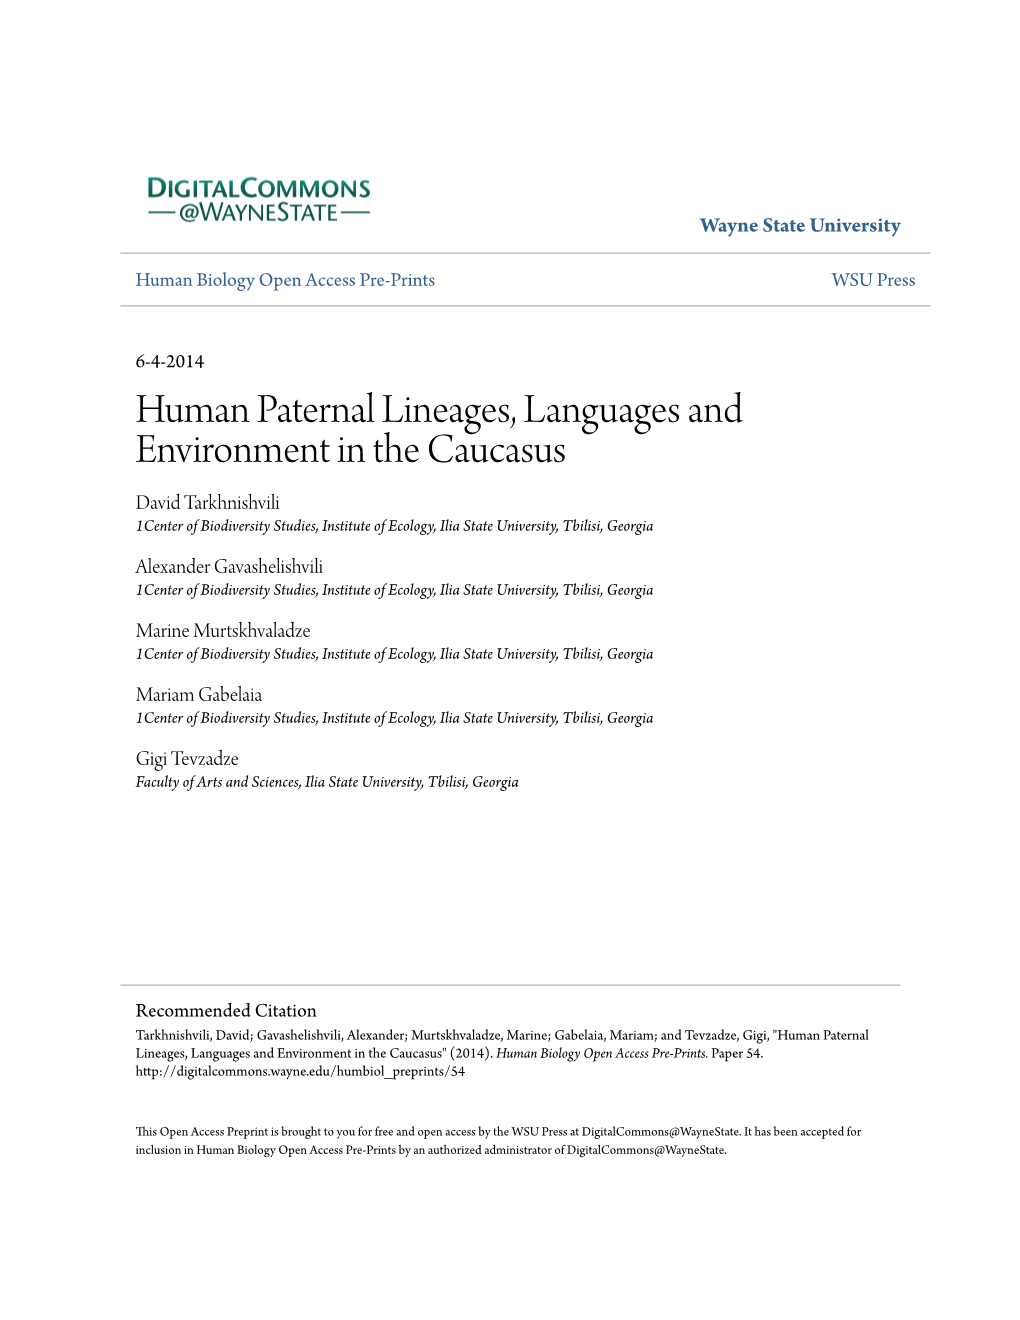 Human Paternal Lineages, Languages and Environment in the Caucasus